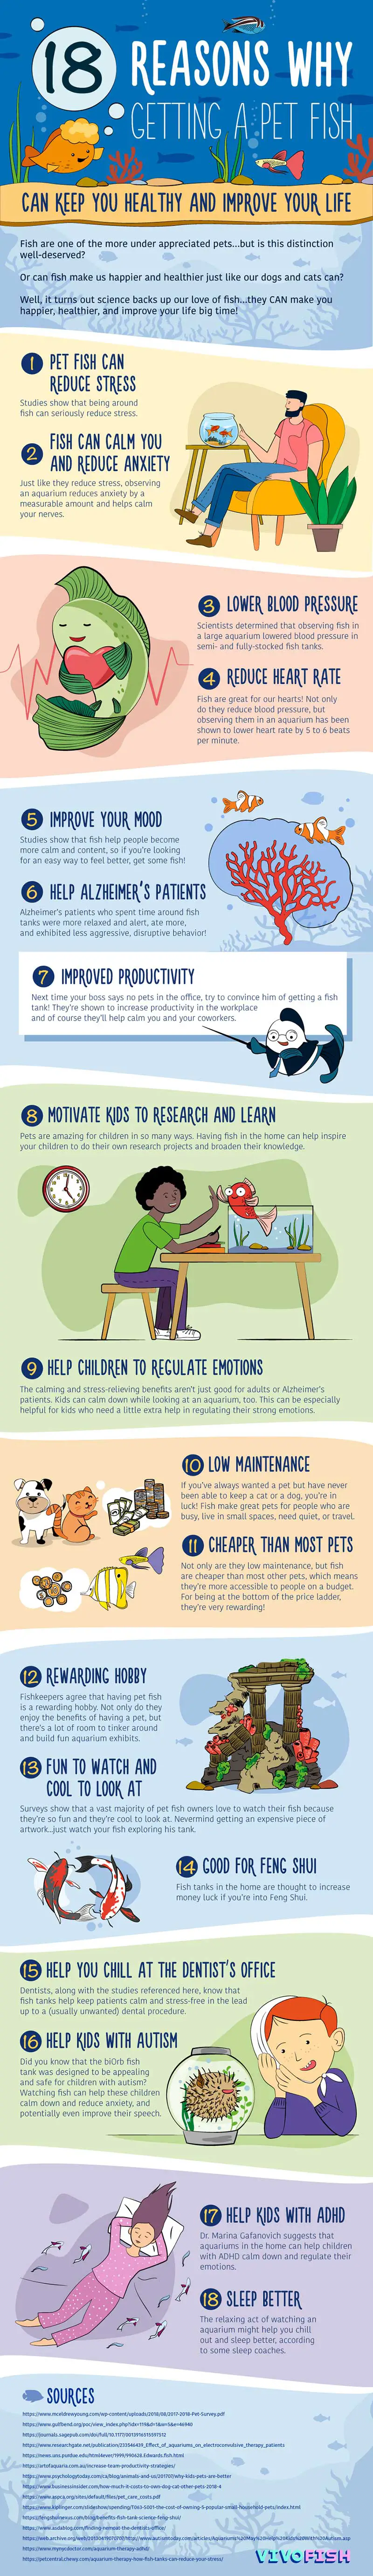 fishkeeping-benefits-infographic-med